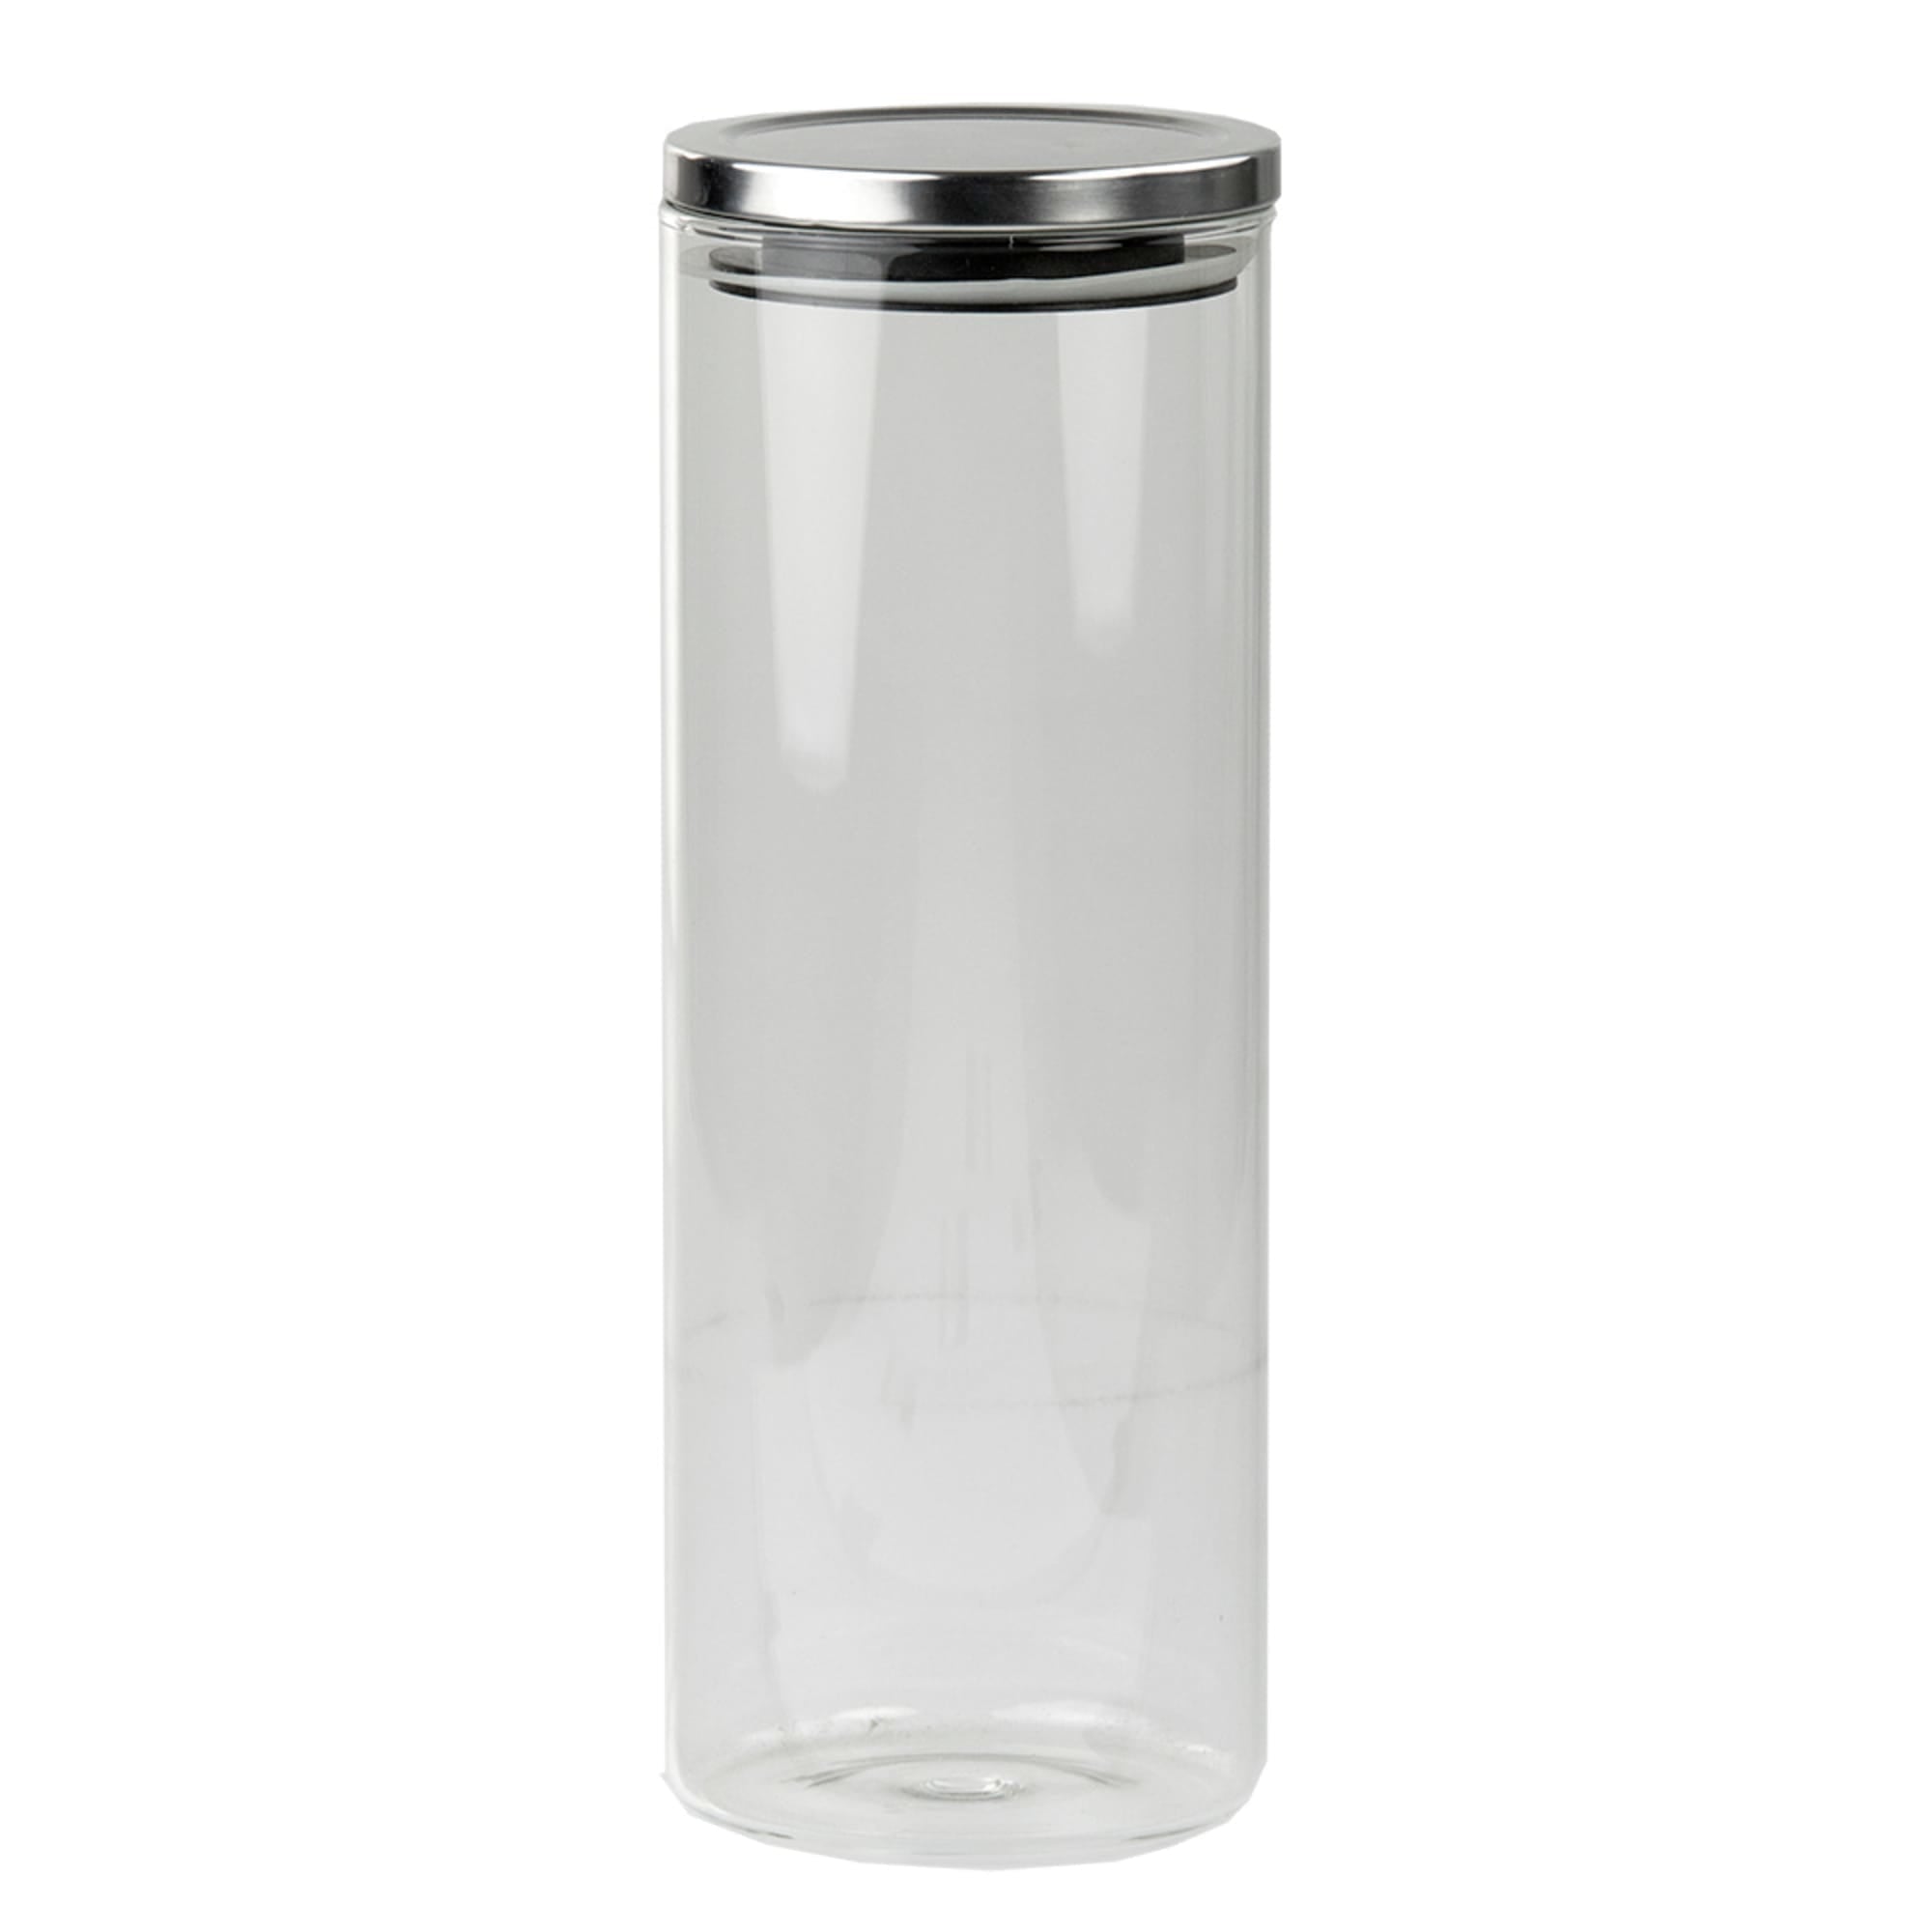 Home Basics 60 oz.  Borosilicate Glass Canister with Stainless Steel Top, Silver $5.00 EACH, CASE PACK OF 12